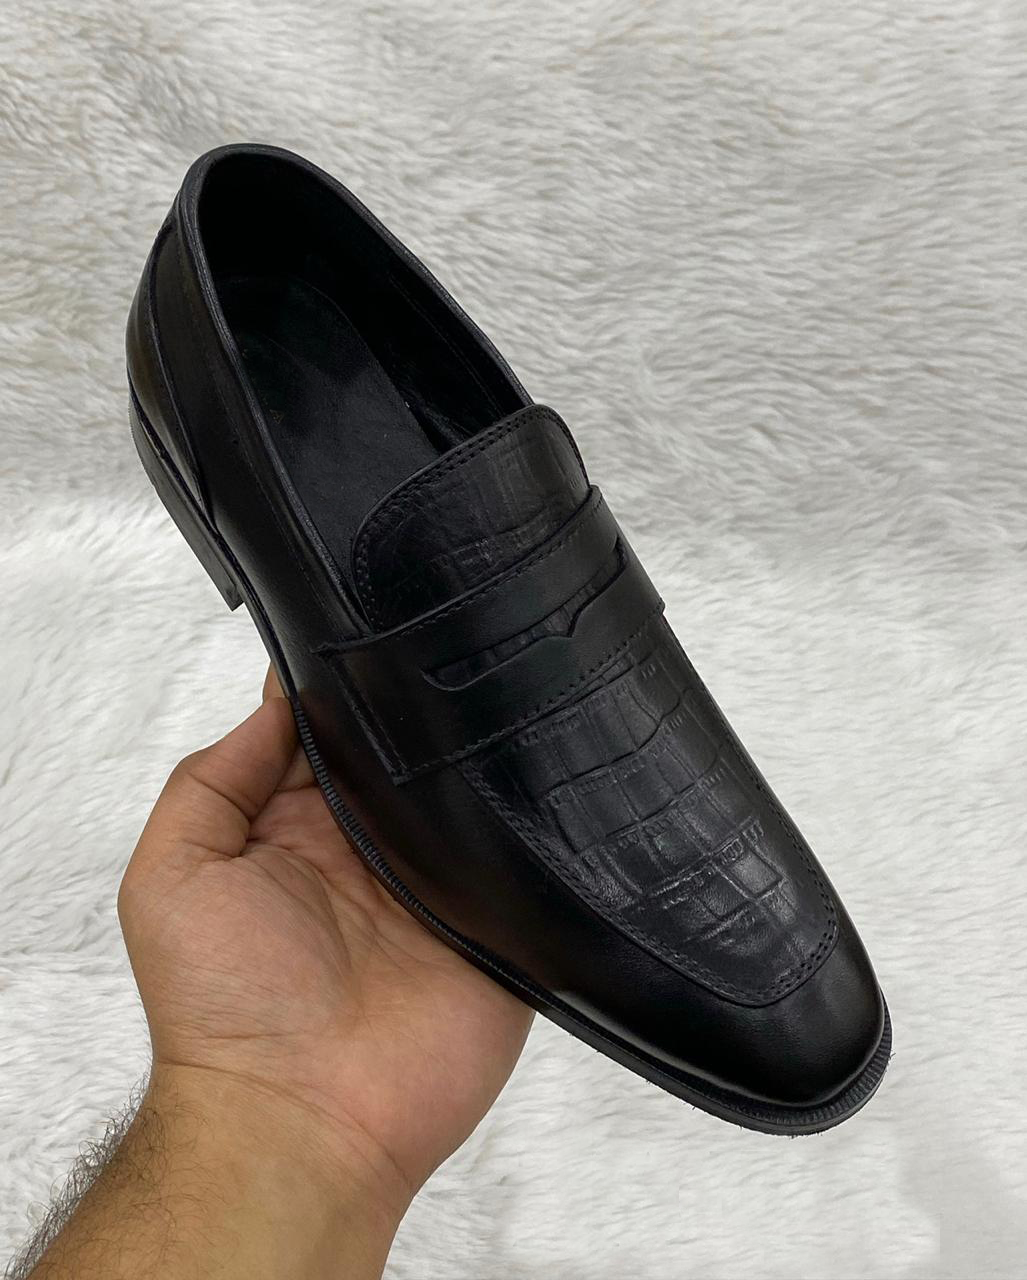 Stylish Leather Patent Slipons With Tassles For Men-FunkyTradition